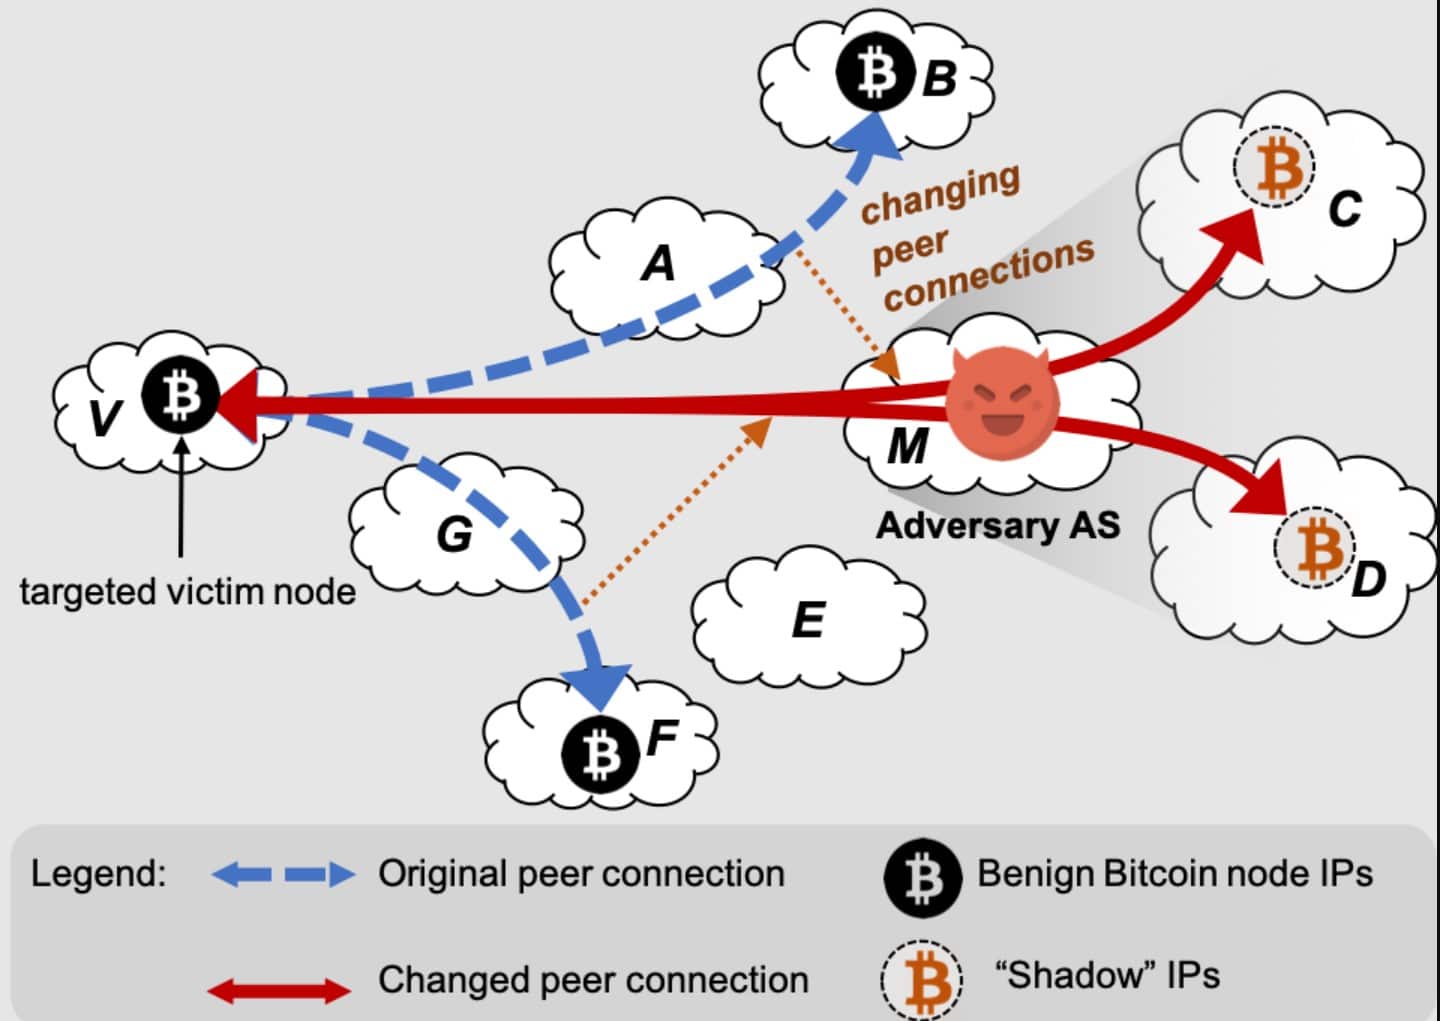 Peer to peer Network. Bitcoin: a peer-to-peer Electronic Cash System оригинал. Deauthentification Attack scheme. Separate chaining vs open addressing. Node connections